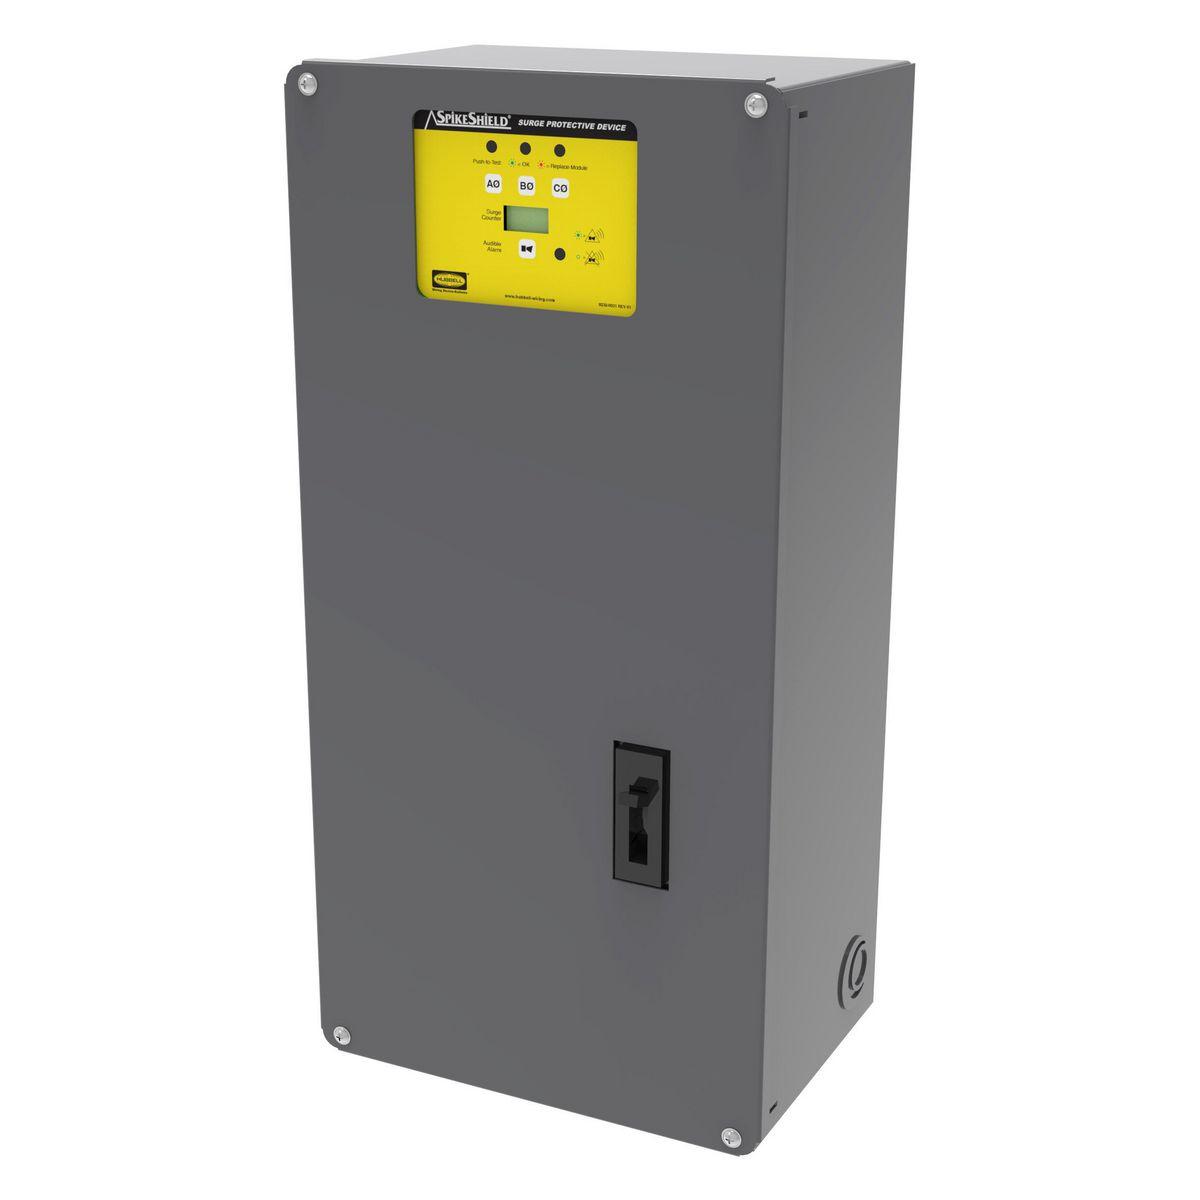 Hubbell HBL5P320DB Surge Protective Devices, Panel, 320KAPeak Capacity, Delta 240V AC, 3-Pole 4-Wire Grounding, With Disconnect 